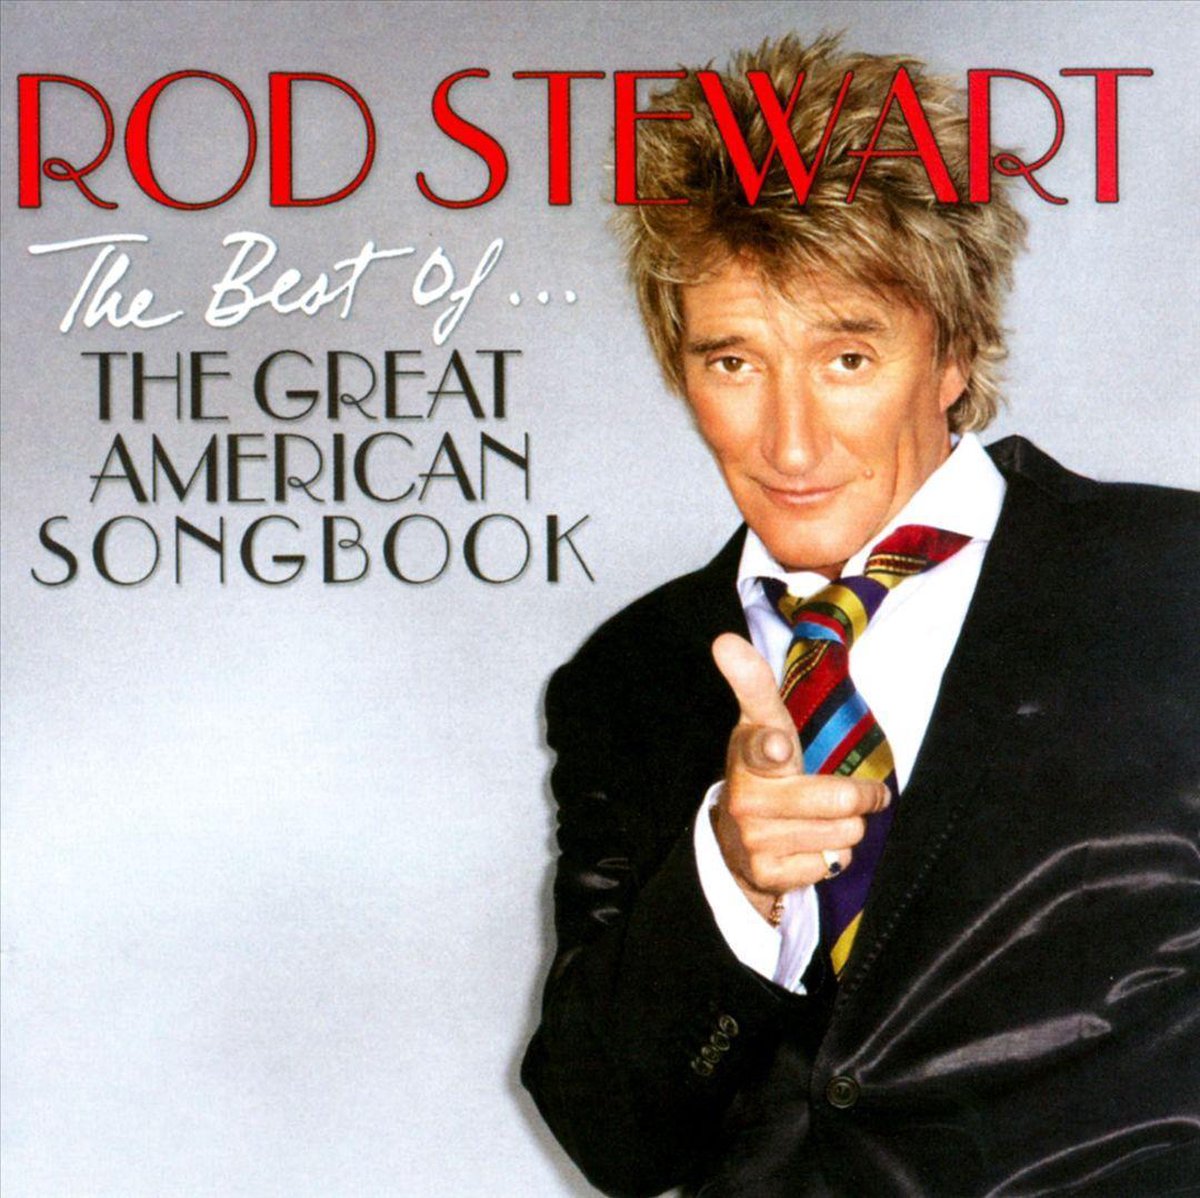 The Best of... The Great American Songbook | Rod Stewart